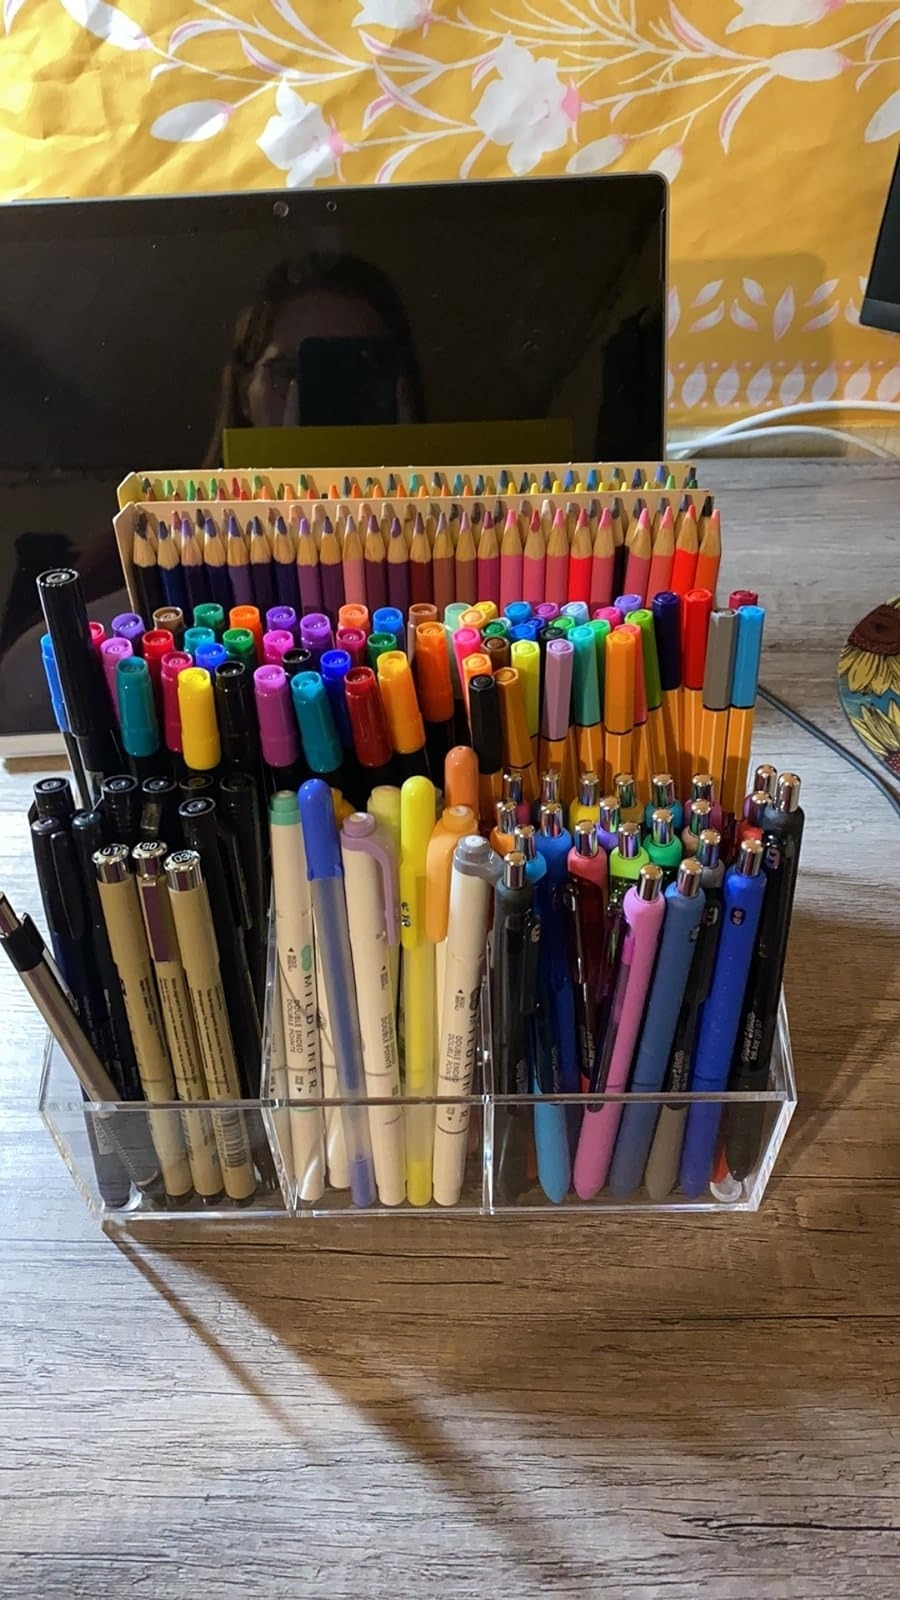 acrylic desk organizer with colorful pens